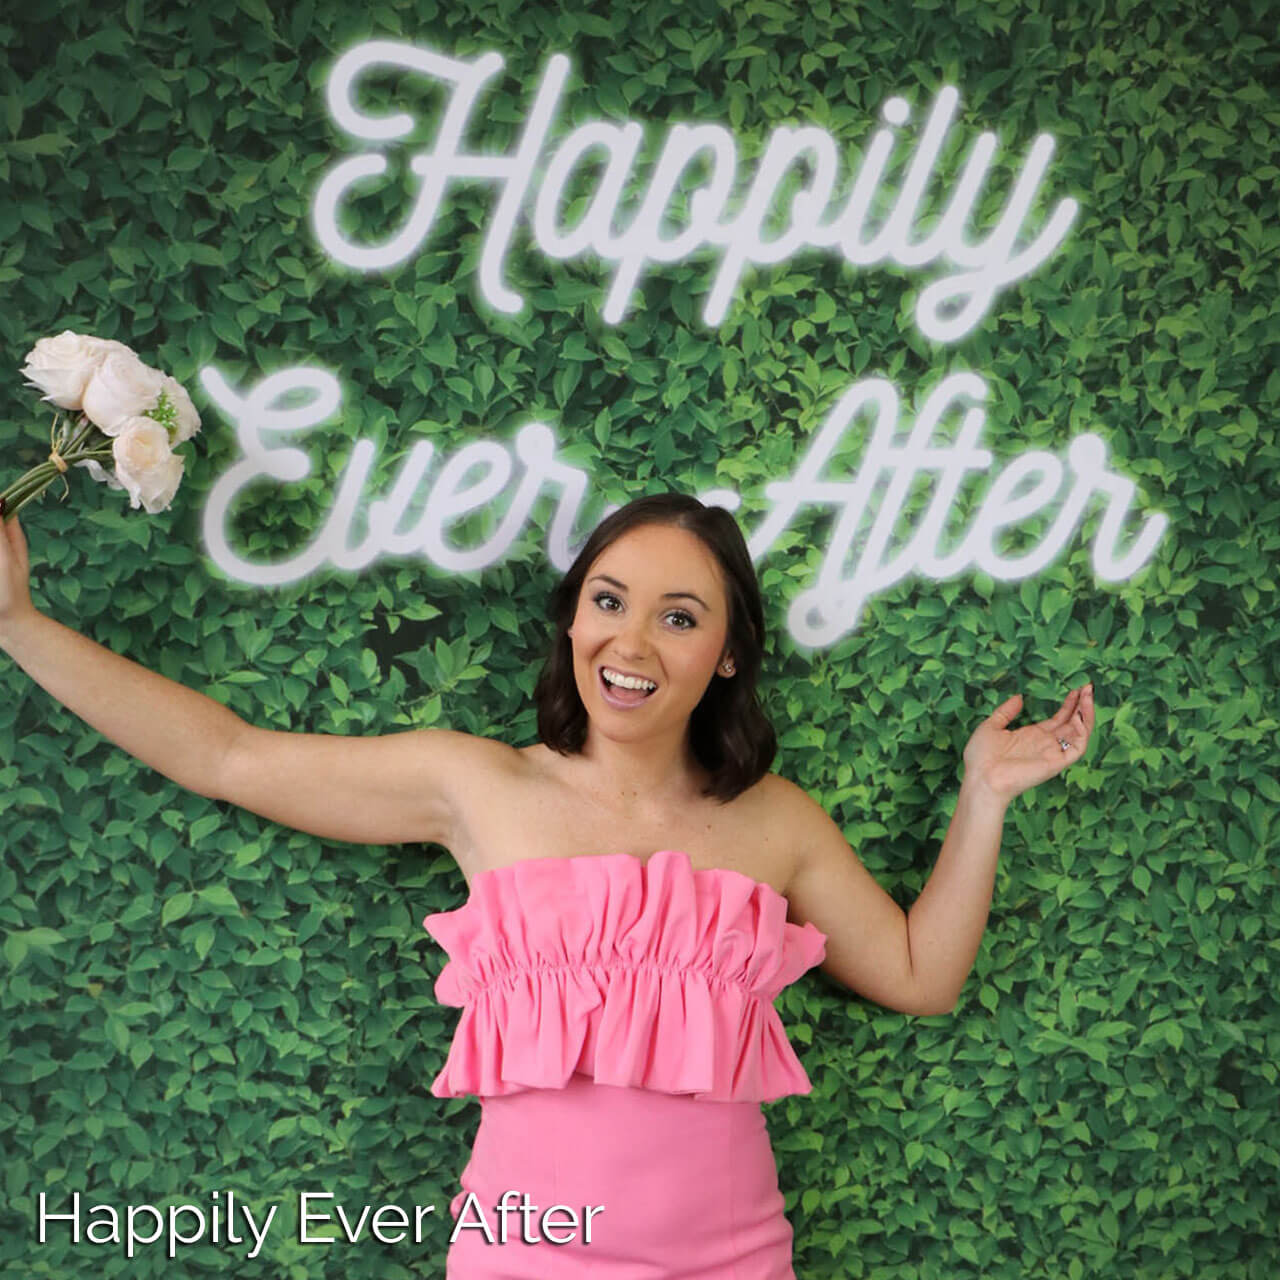 Ivy Green Hedge / Happily Ever After 